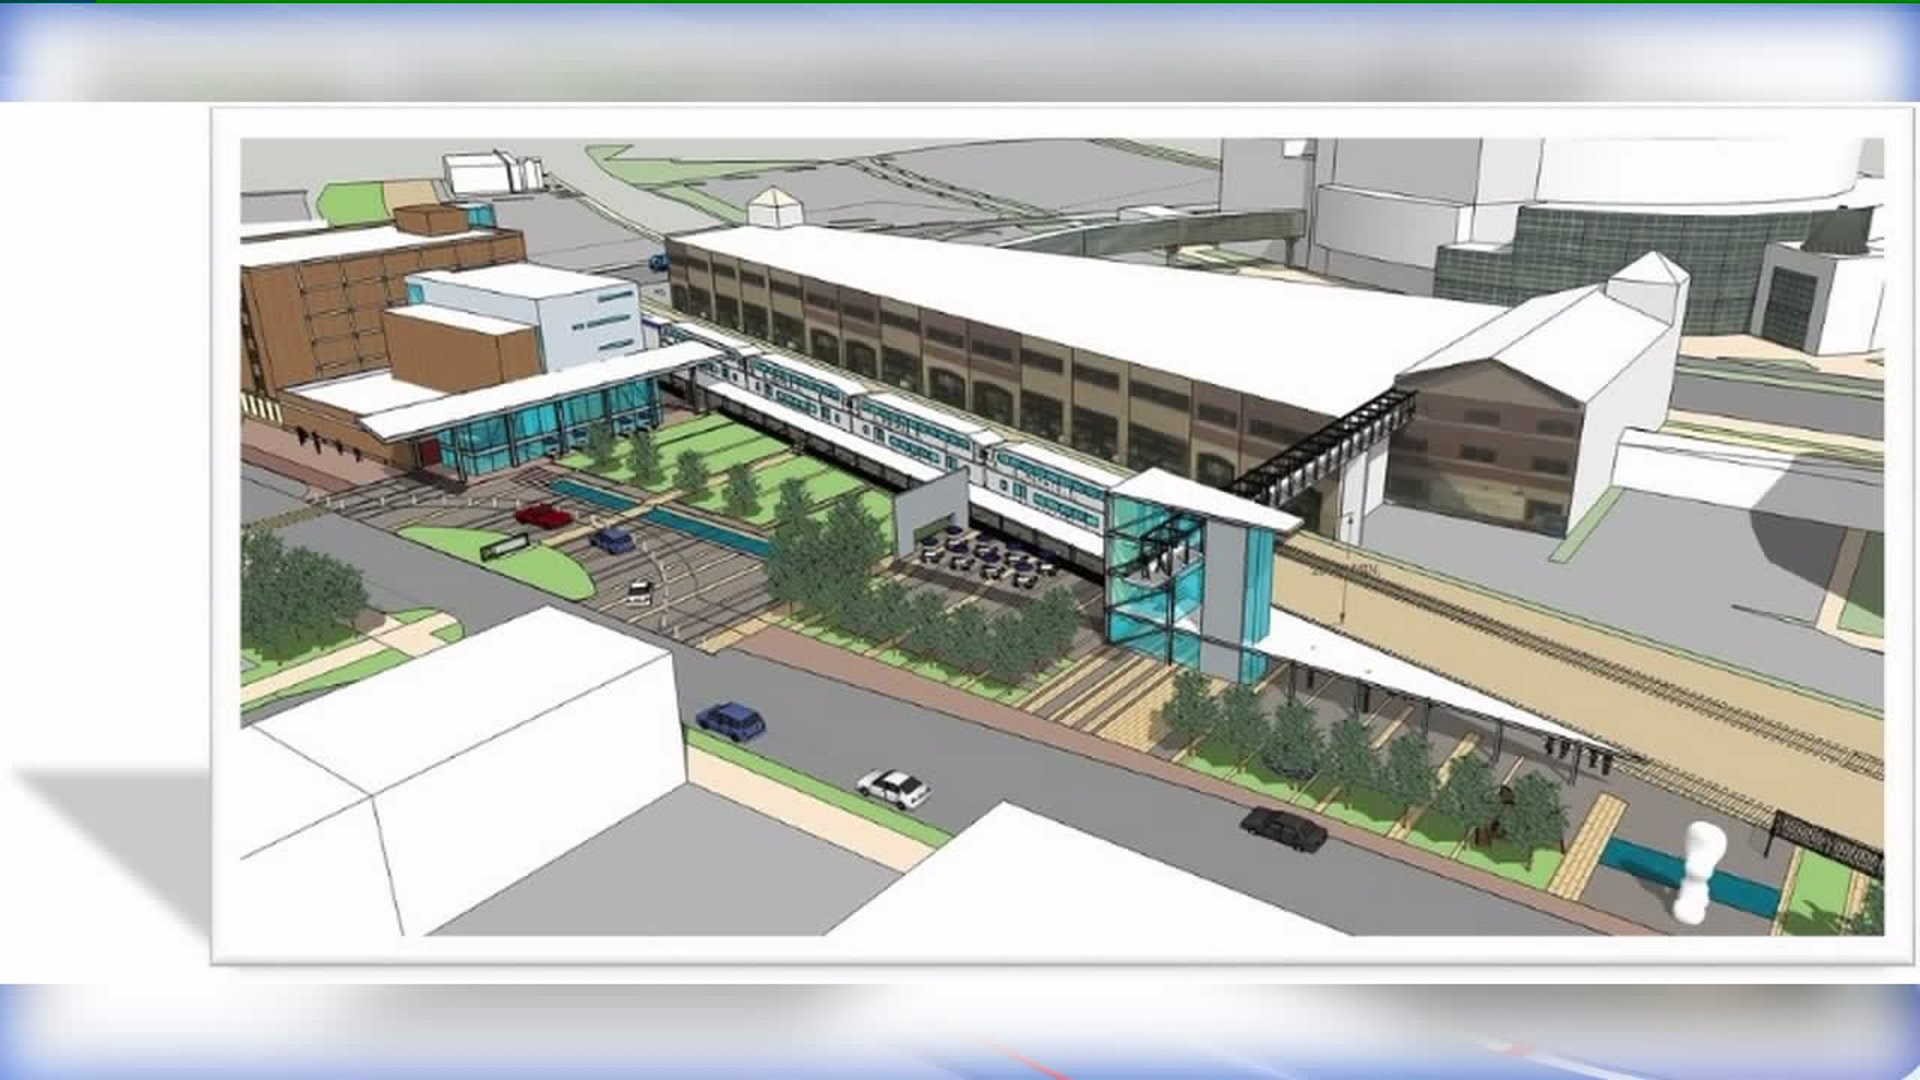 Moline to build walkway between bus station and future train station downtown